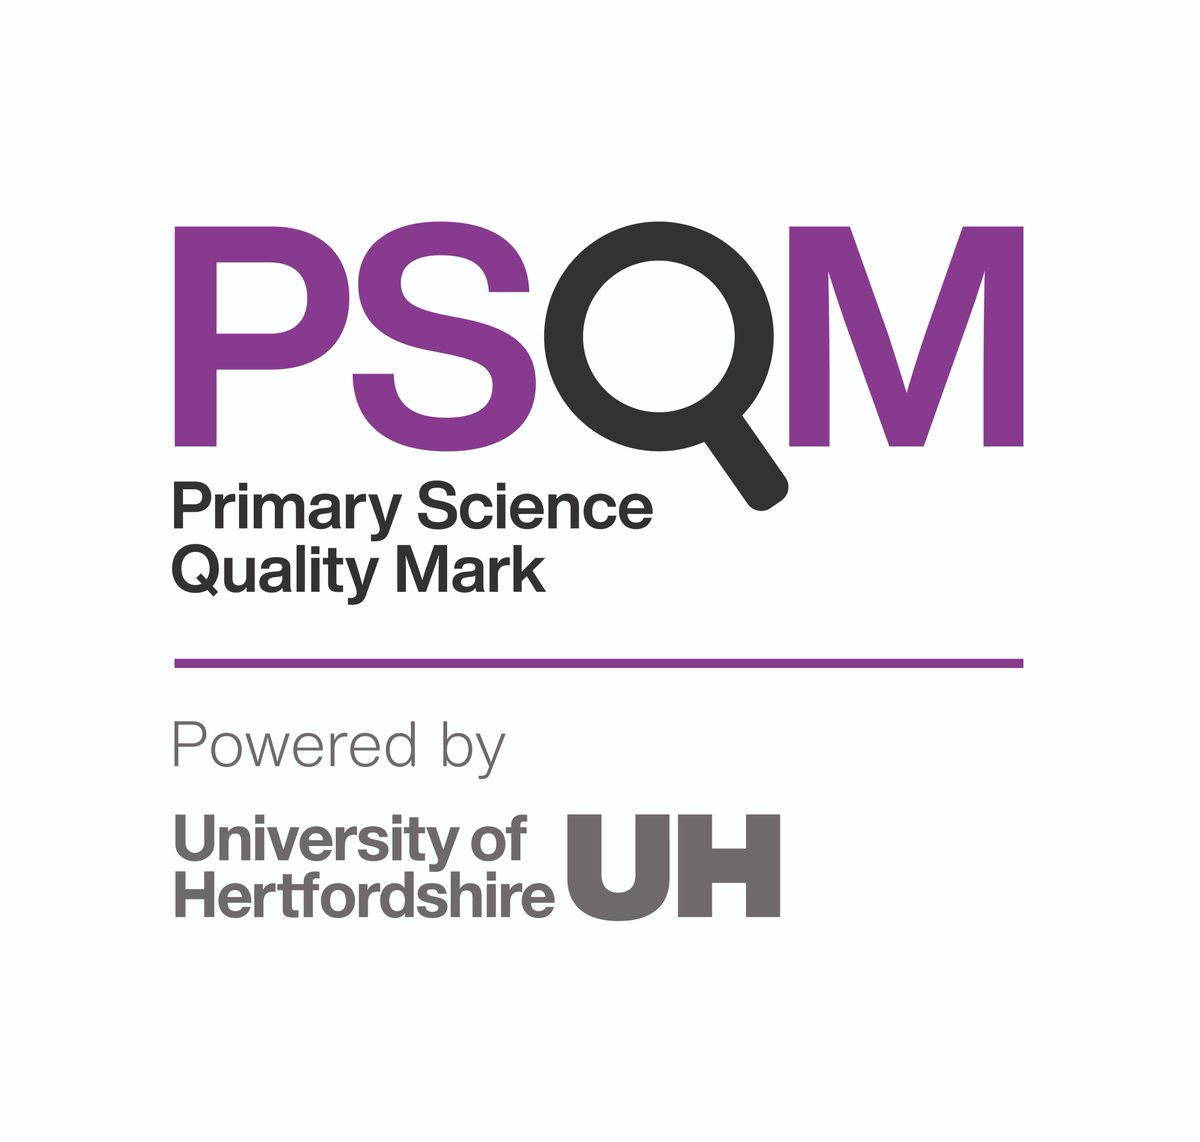 PSQM in Scotland! To learn more about how PSQM can support you and your school in developing science, come to an information session on 2nd May. @Psqm_HQ @Glazgow @arbuckle_elaine @PriSciEarle @SSERCprimary 
3.30pm: eventbrite.co.uk/e/primary-scie…
5.30pm:
eventbrite.co.uk/e/primary-scie…